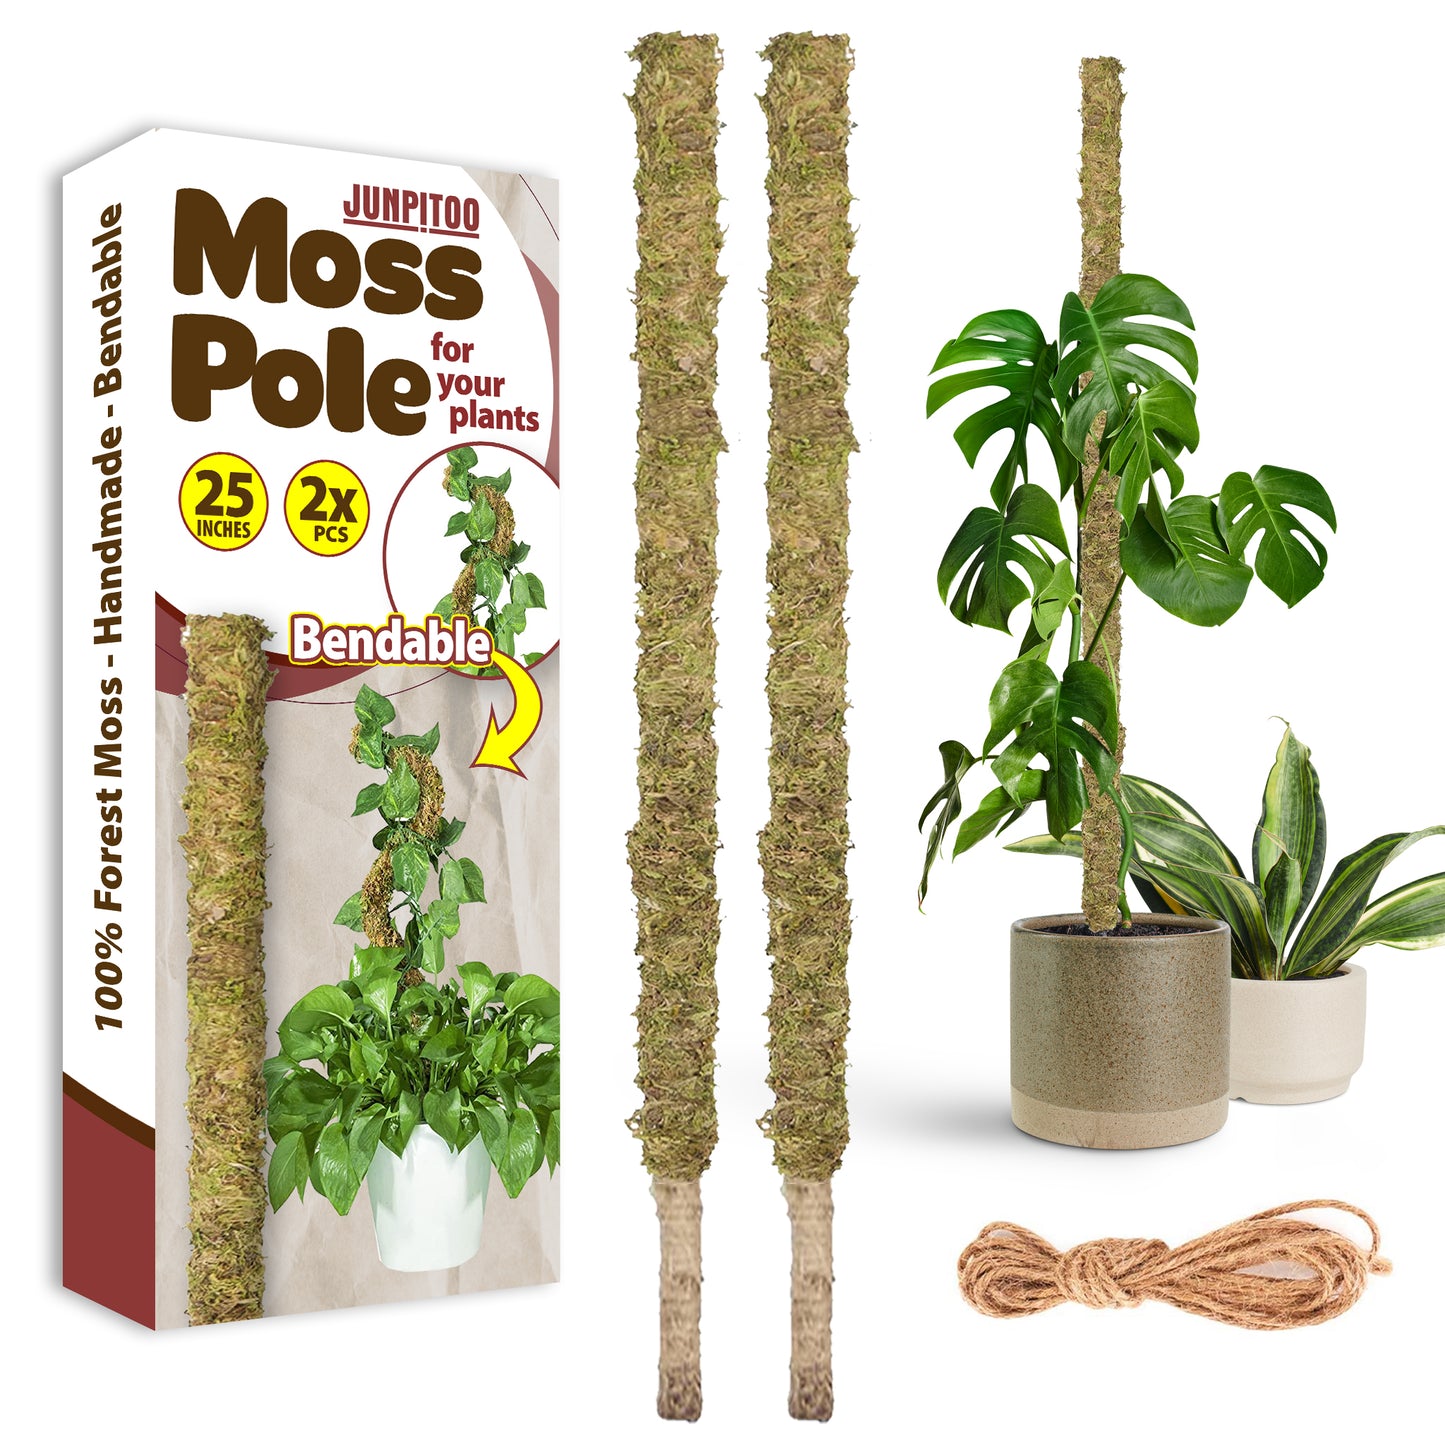 JUNPITOO Moss Poles for Climbing Plants (2 Pack 25 Inches- Bendable) - 100% Forest Sphagnum Moss Sticks - Slim Plant Stakes for Small and Medium Potted Plants Indoor, Monstera, Pothos.